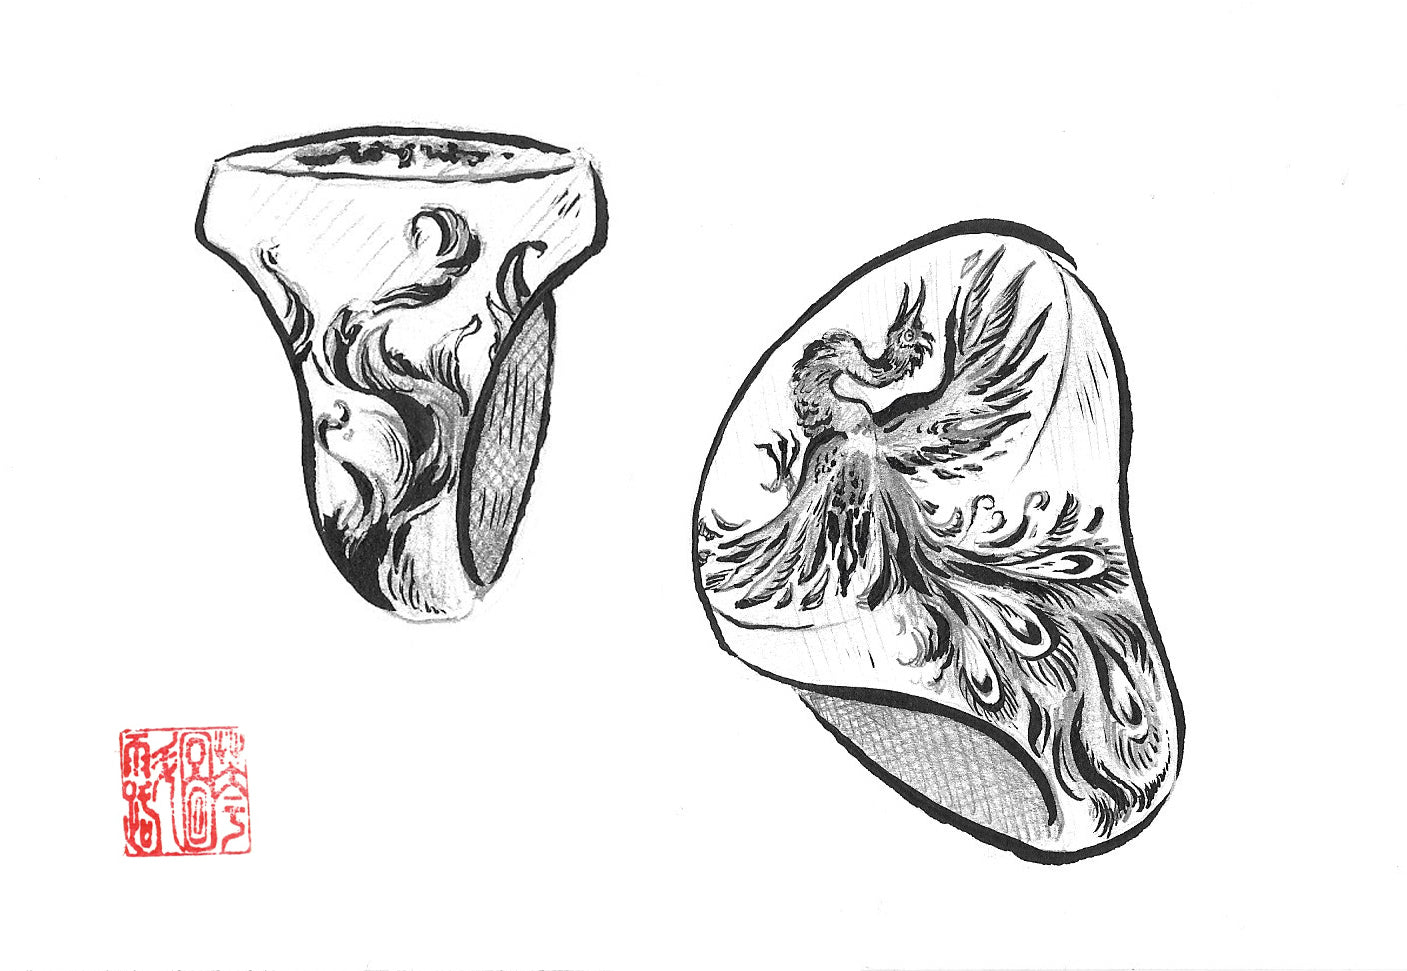 Castro Smith Jewelry Phoenix Signet Ring Sketch Drawing.